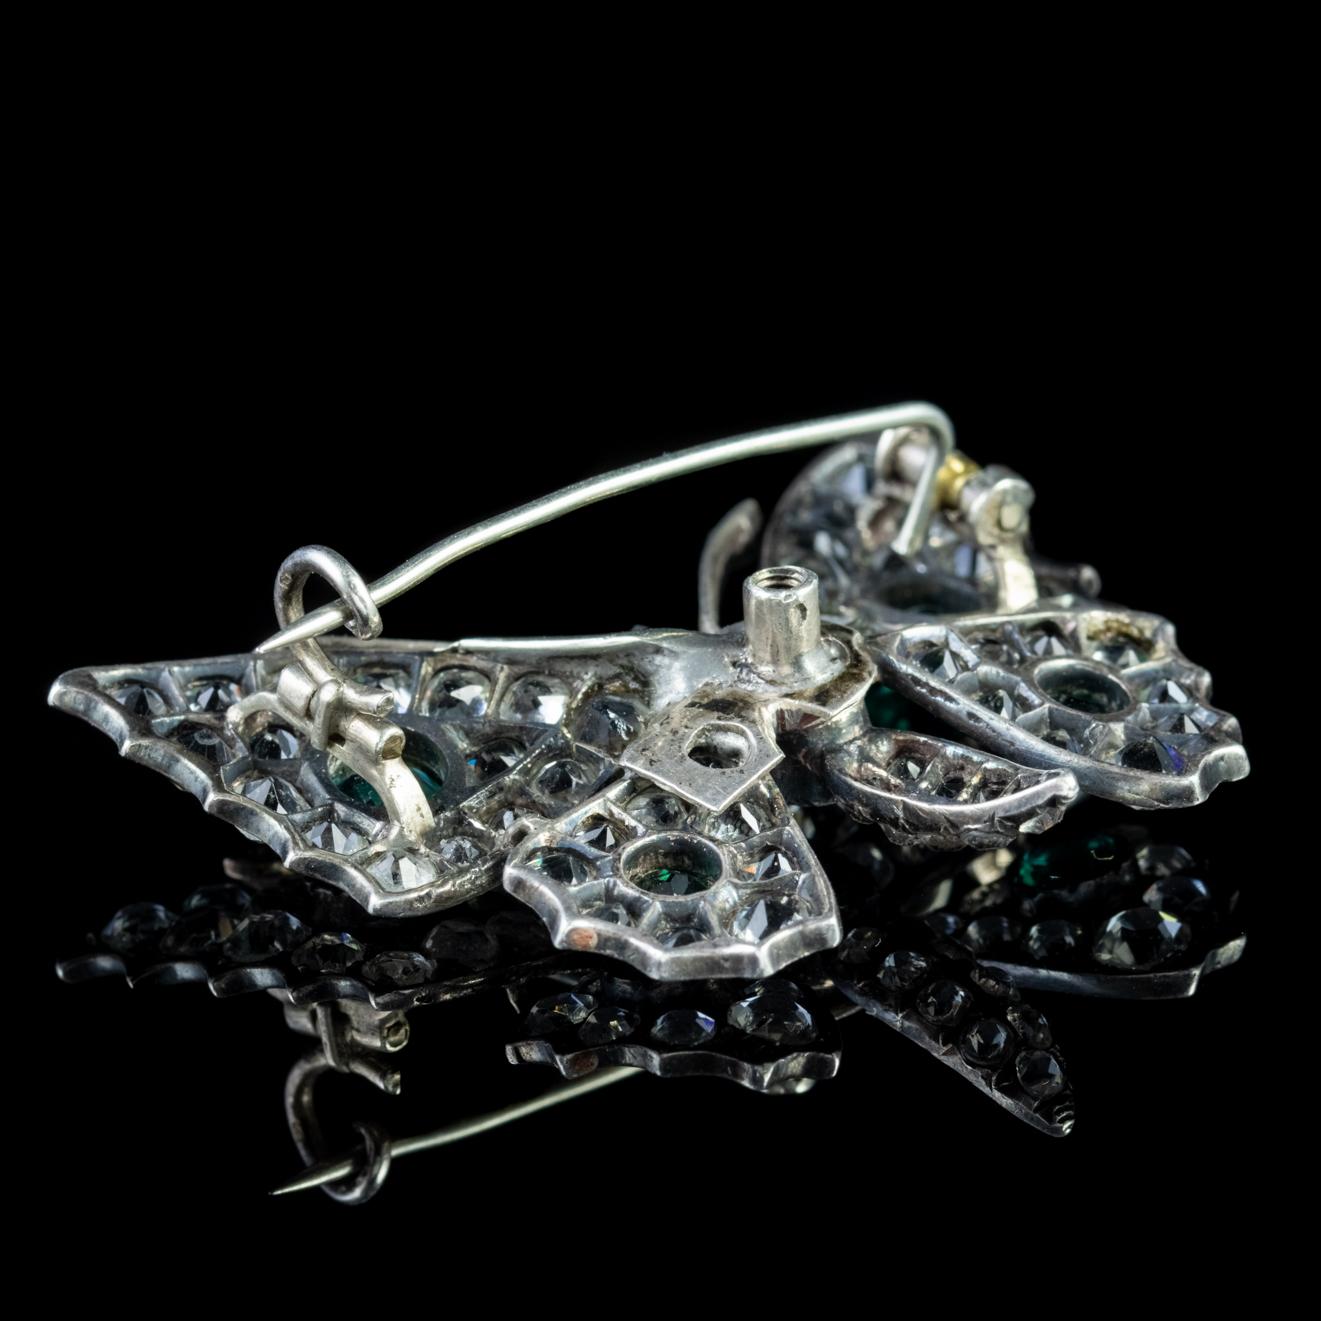 This beautiful Victorian butterfly brooch has been sculpted in silver. It contains sixty two clear, four green and two pink paste stones, the last of which are set as the butterfly’s eyes.

Paste is a heavy, transparent flint glass that simulates